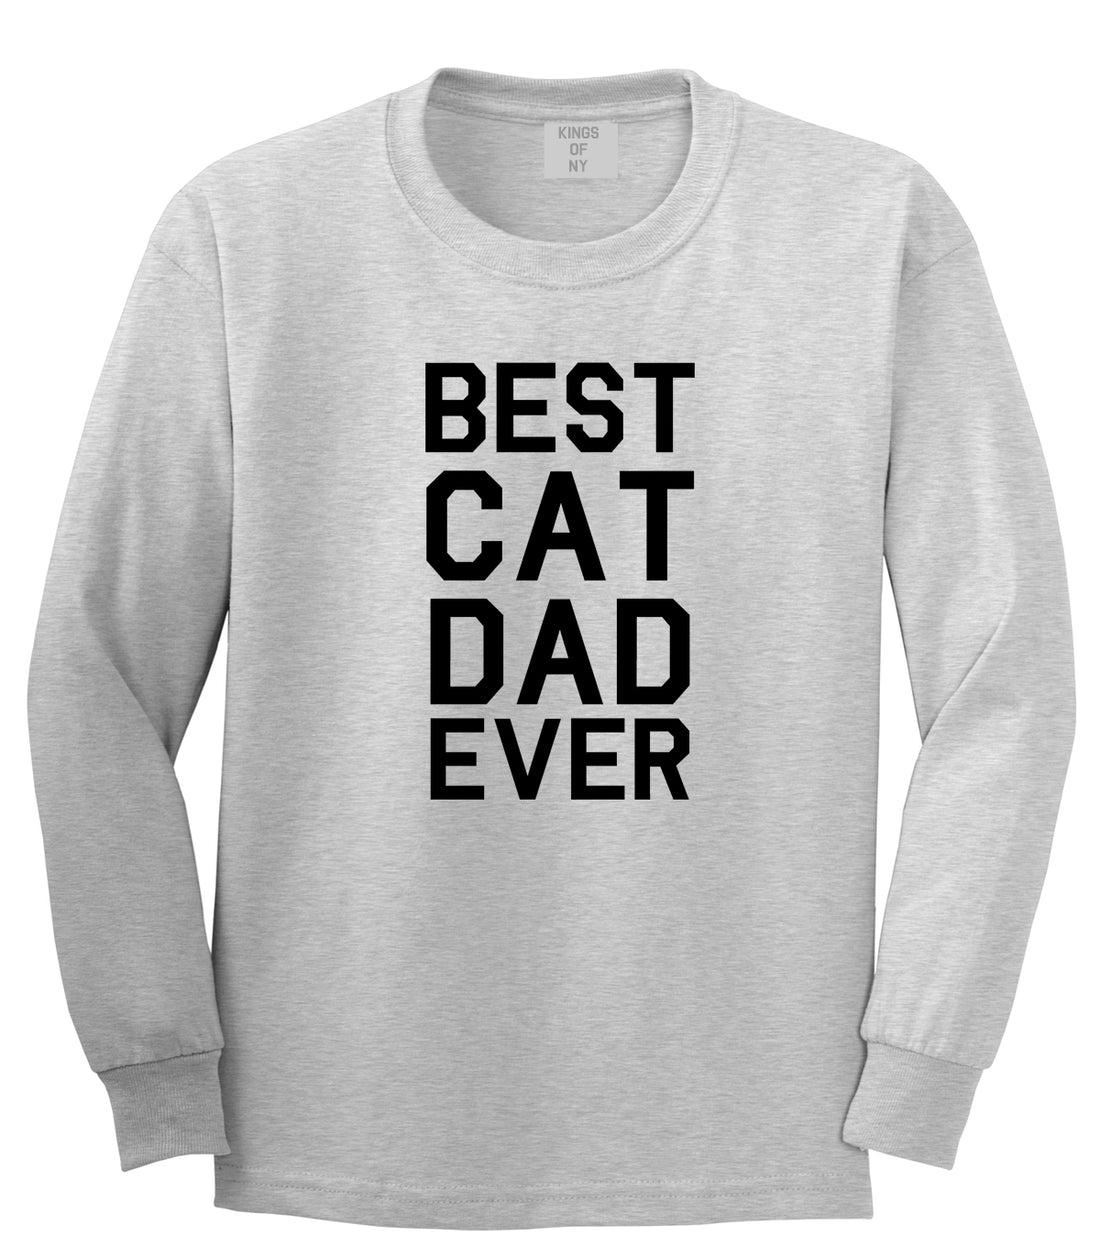 Best Cat Dad Ever Mens Grey Long Sleeve T-Shirt by Kings Of NY